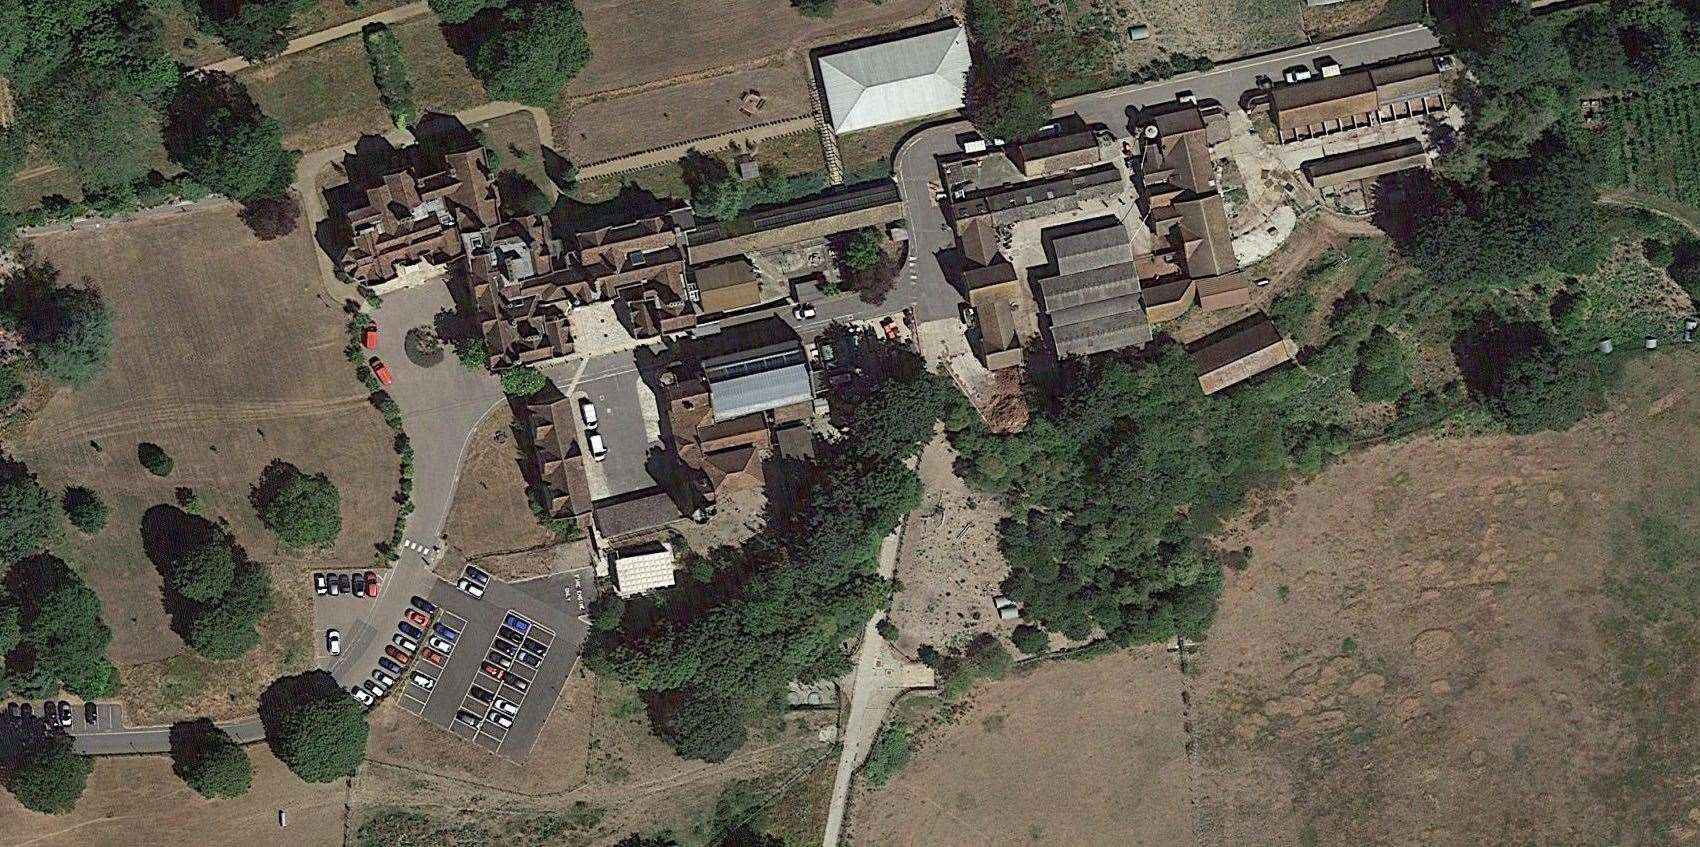 The offence happened at HMP East Sutton Park in Sutton Valence back in 2020. Picture: Google